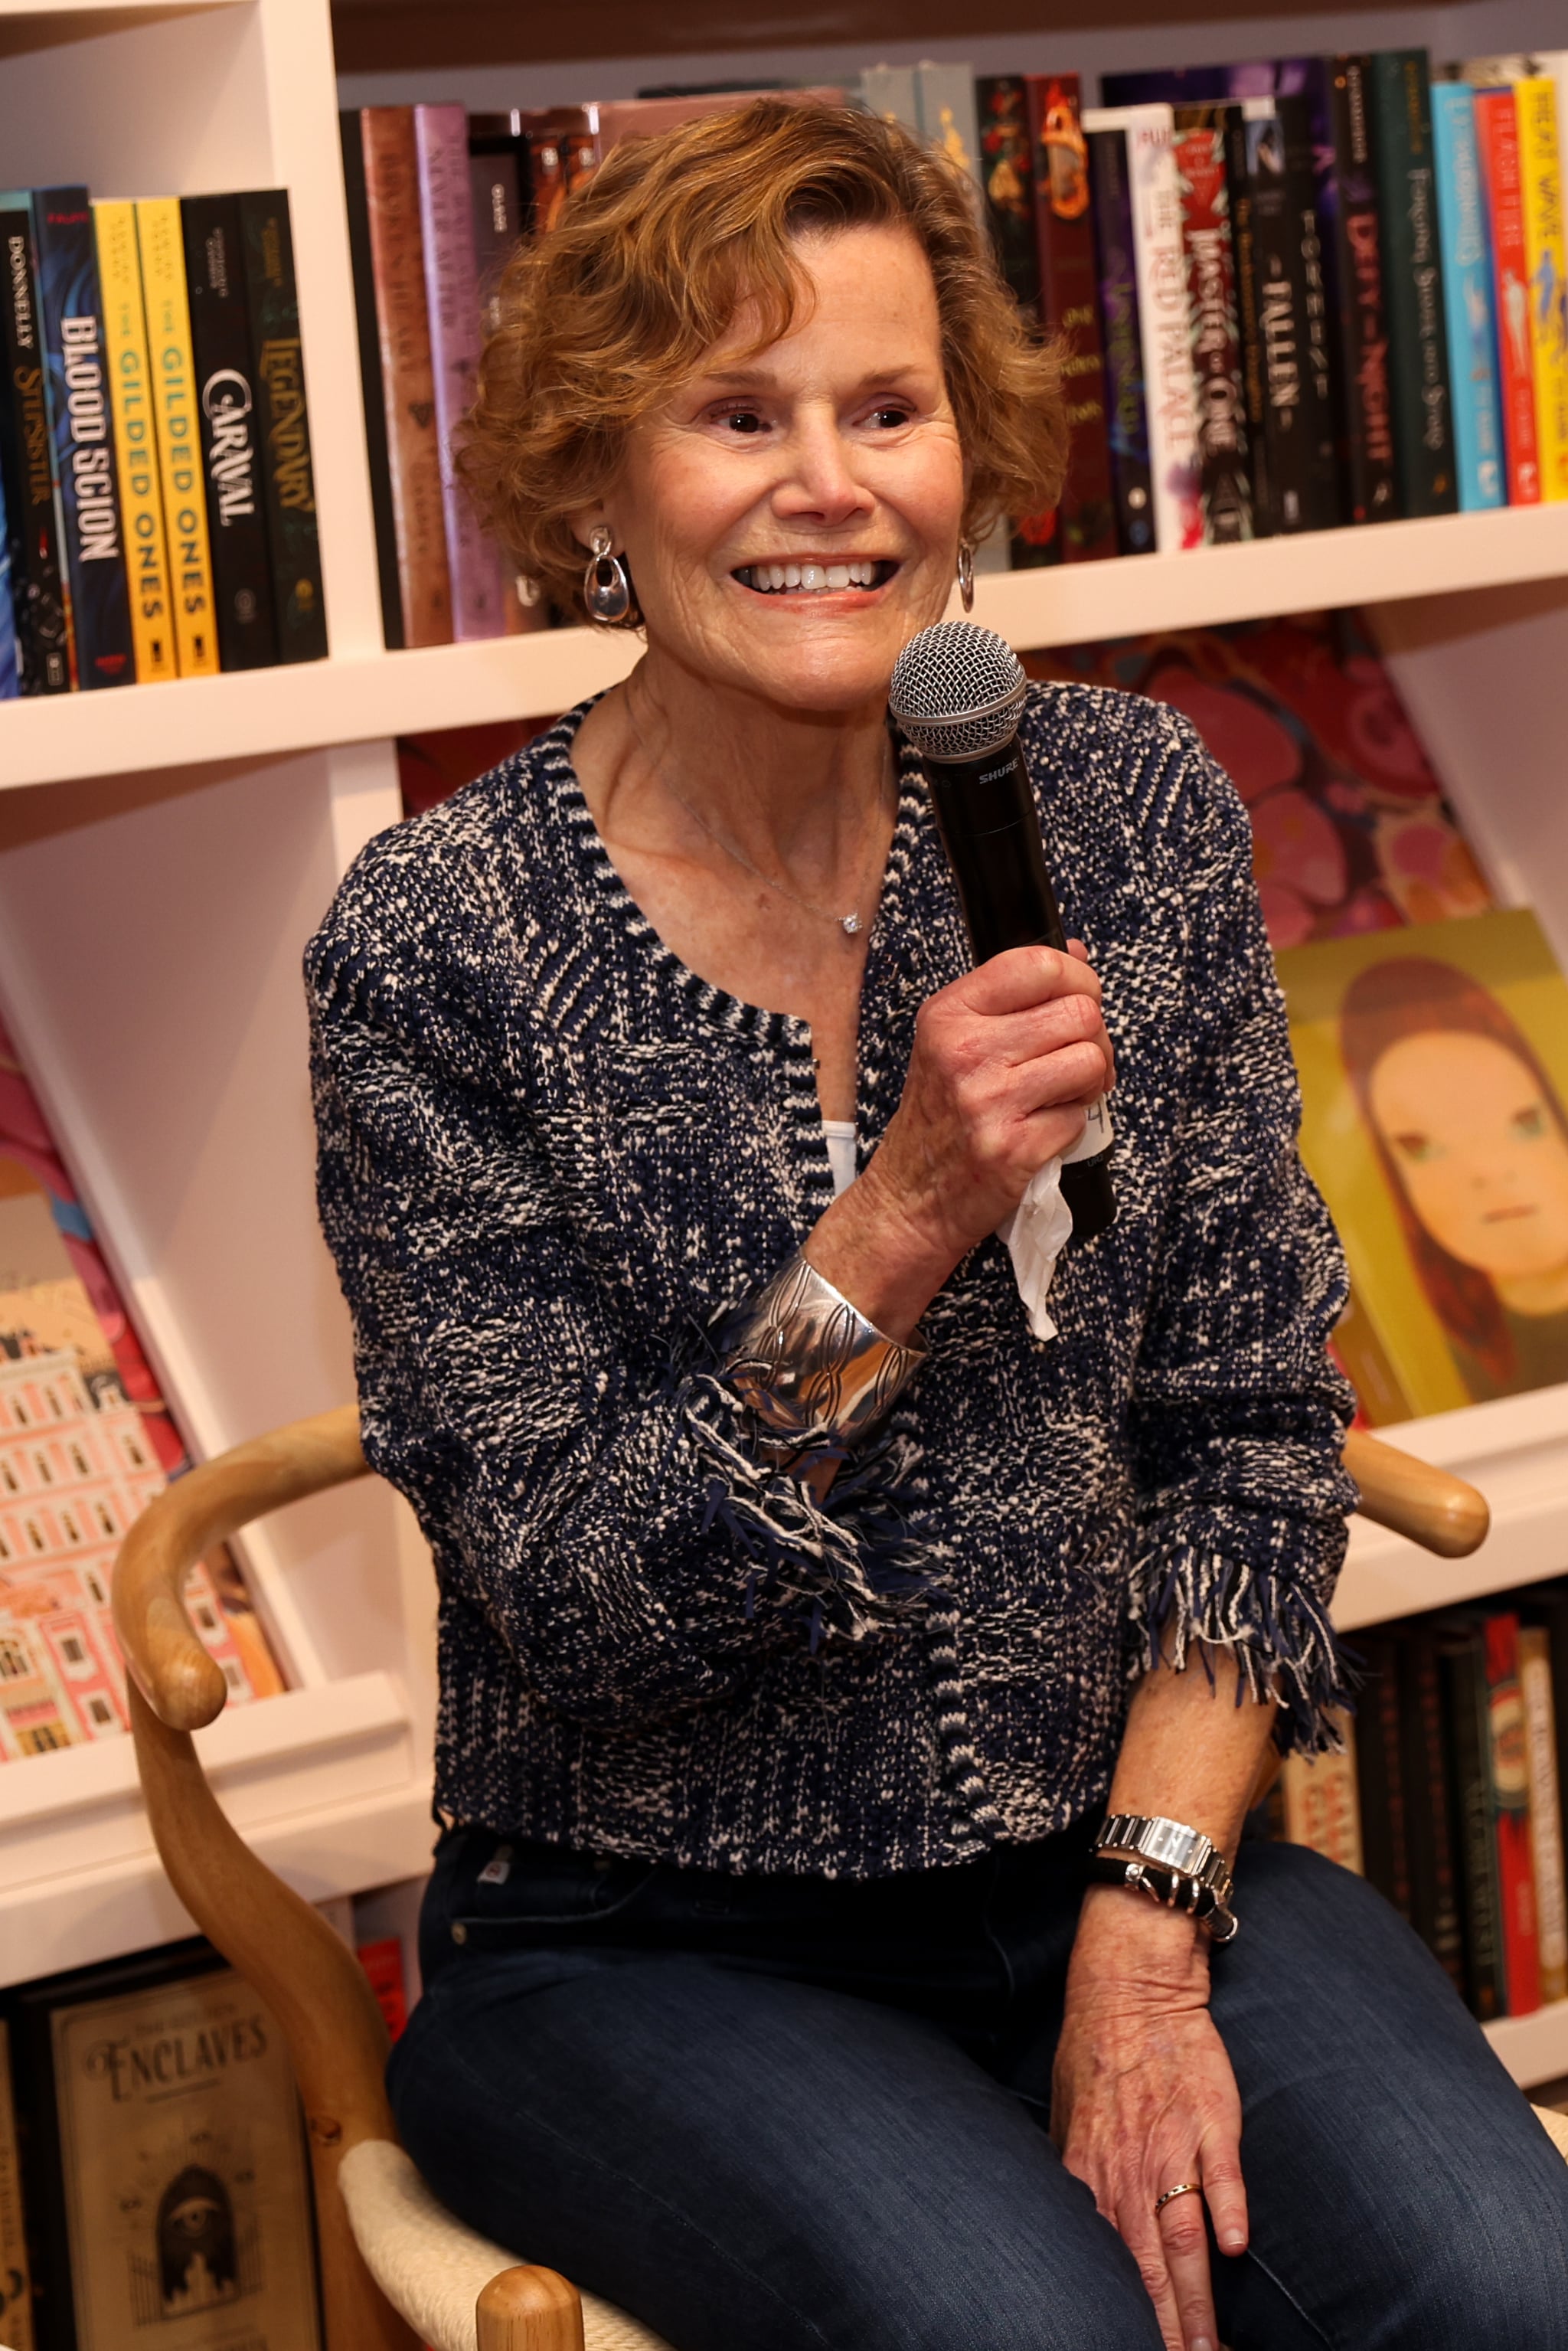 STUDIO CITY, CALIFORNIA - APRIL 17: Judy Blume speaks during the Q&A and reception with Judy Blume celebrating Prime Video's 